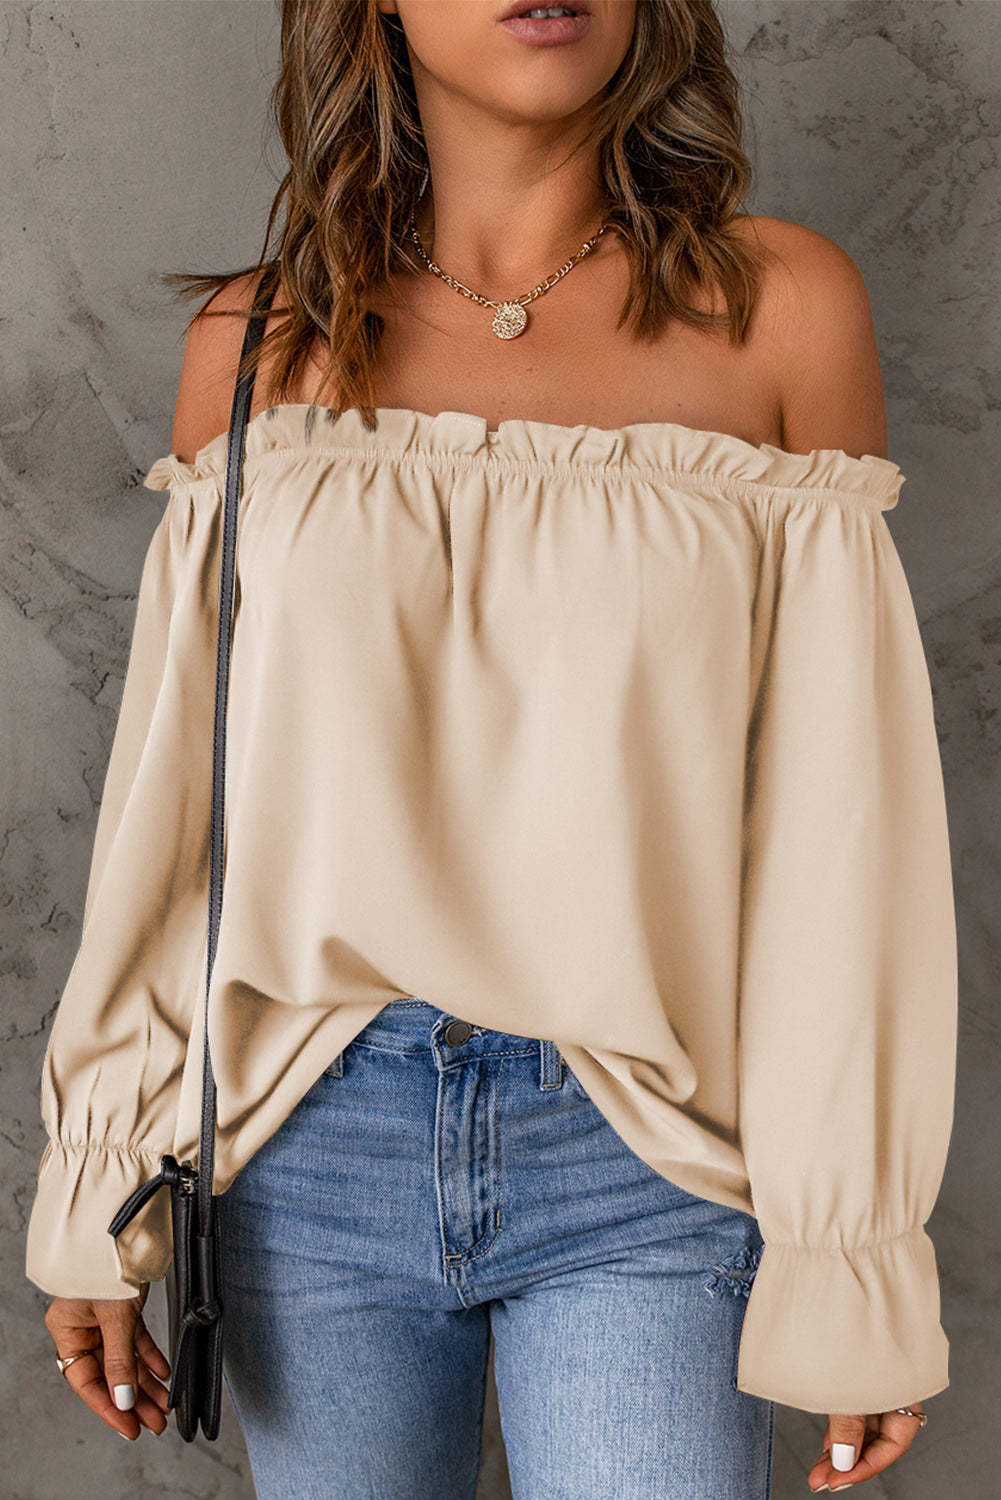 Casual Off Shoulder Long Sleeve Loose Solid Top Blouse